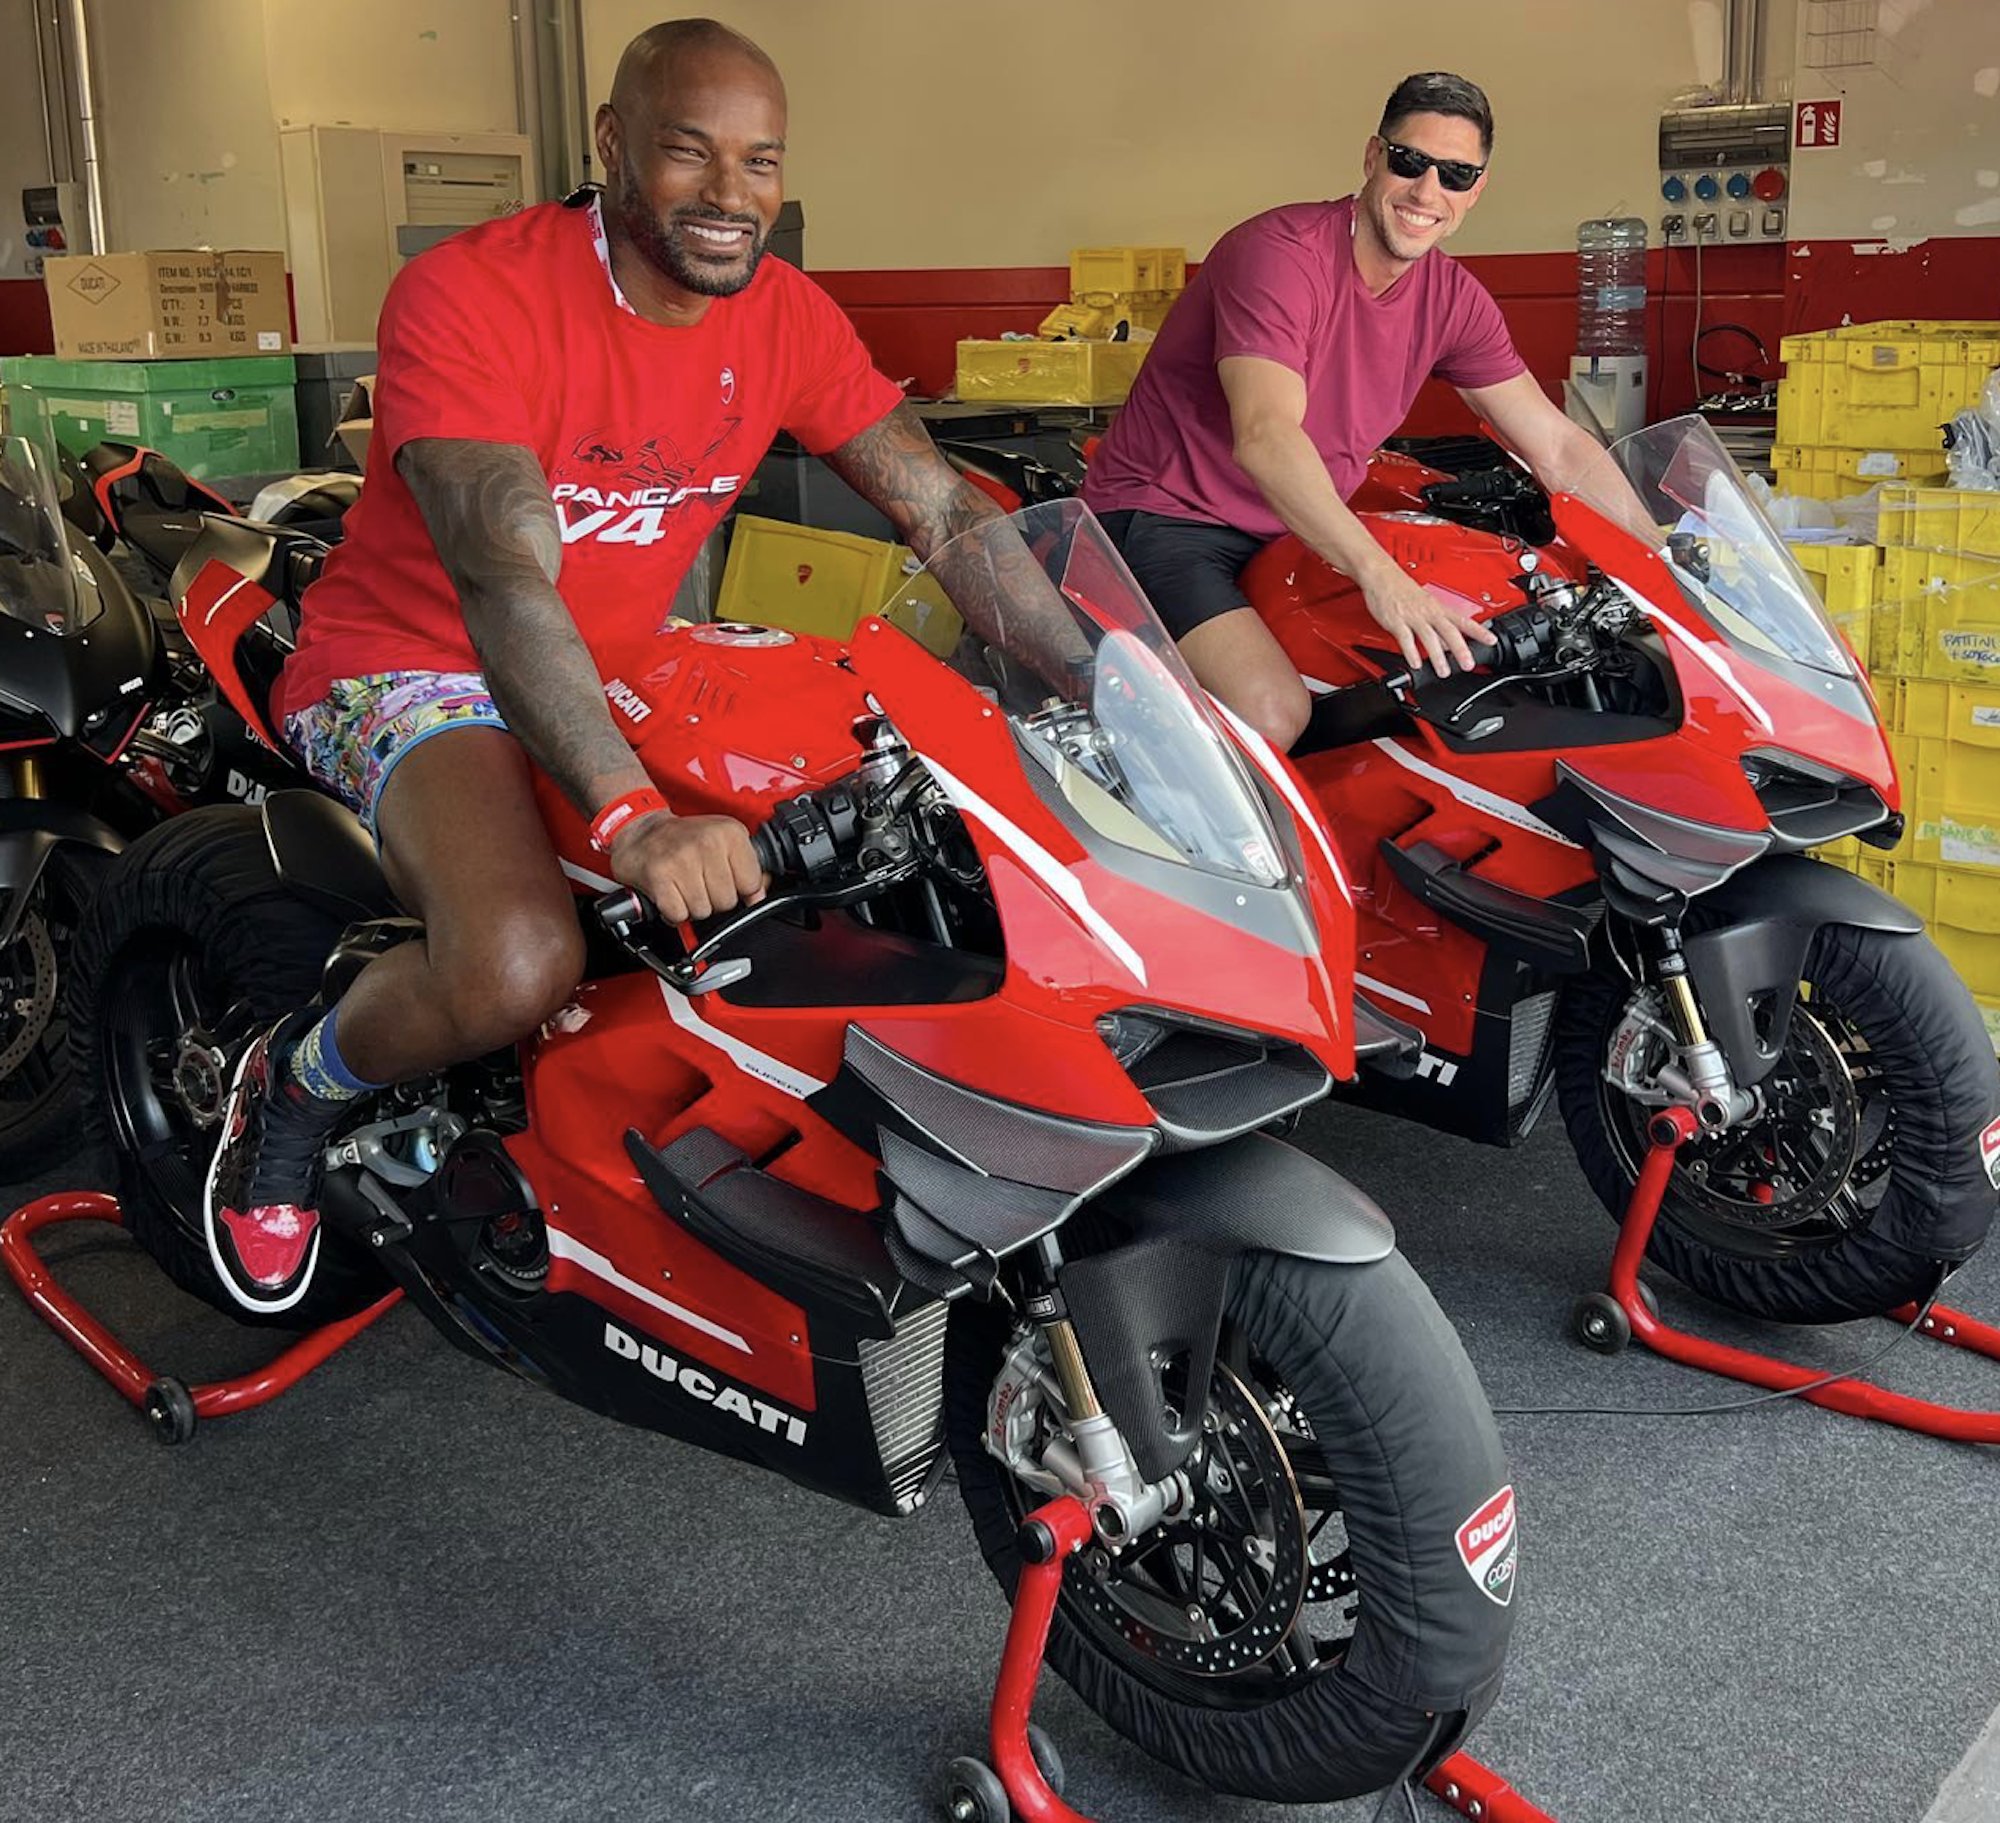 Tyson Beckford at the Ducati Riding Experience. Media sourced from Beckford's Instagram page.